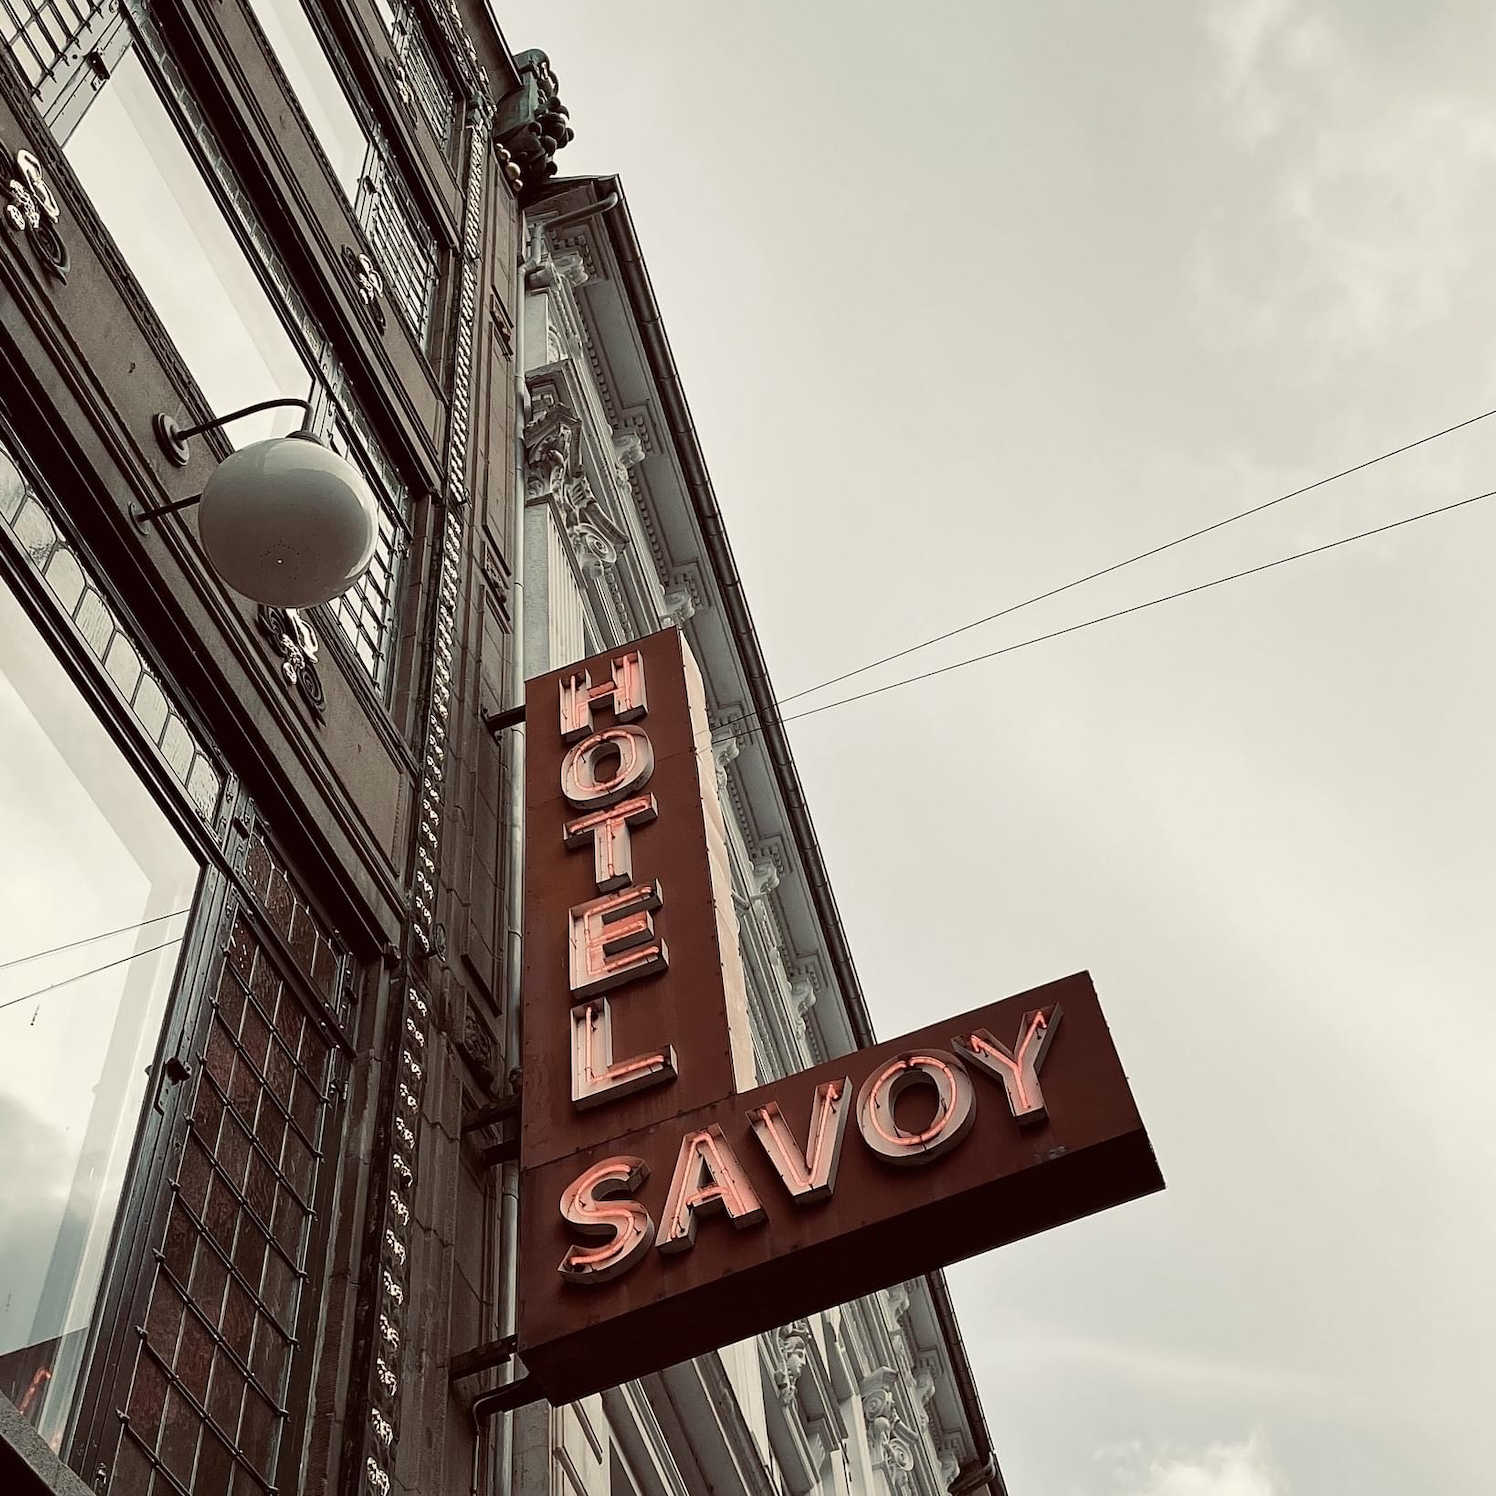 The Savoy Hotel & Bar is looking for a motivated and outgoing HOST/ Front Desk Receptionist to join our team